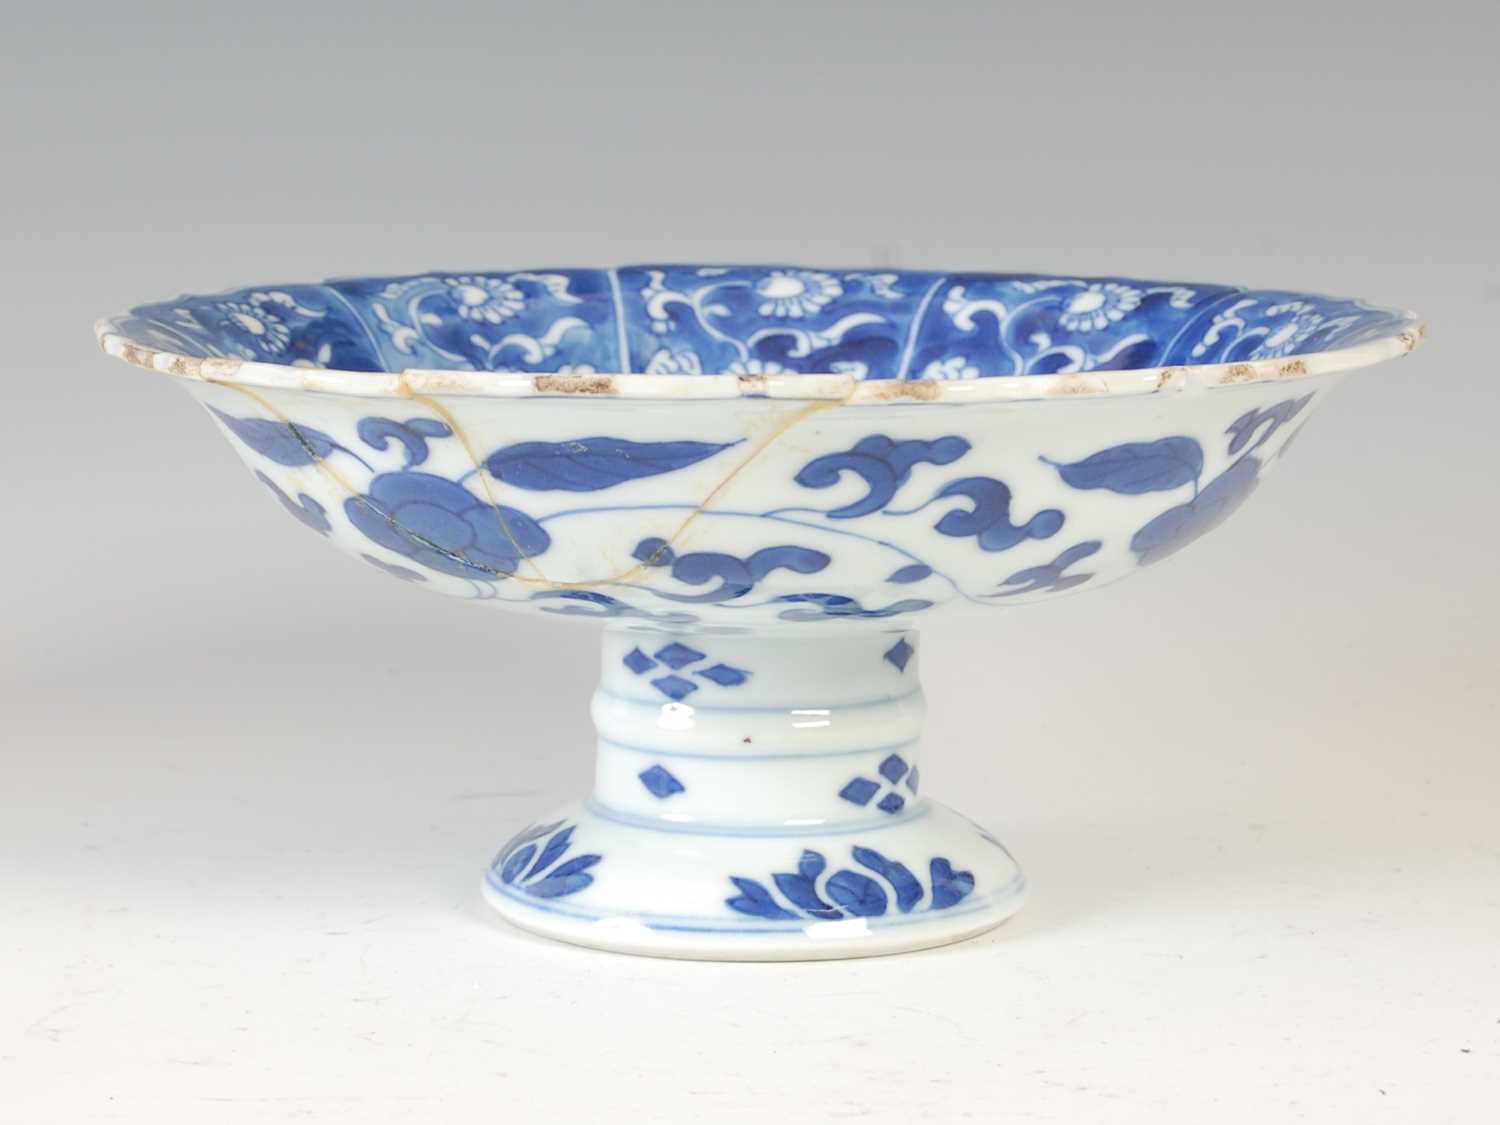 A Chinese porcelain blue and white tazza, Qing Dynasty, decorated with central roundel of bird - Image 8 of 11